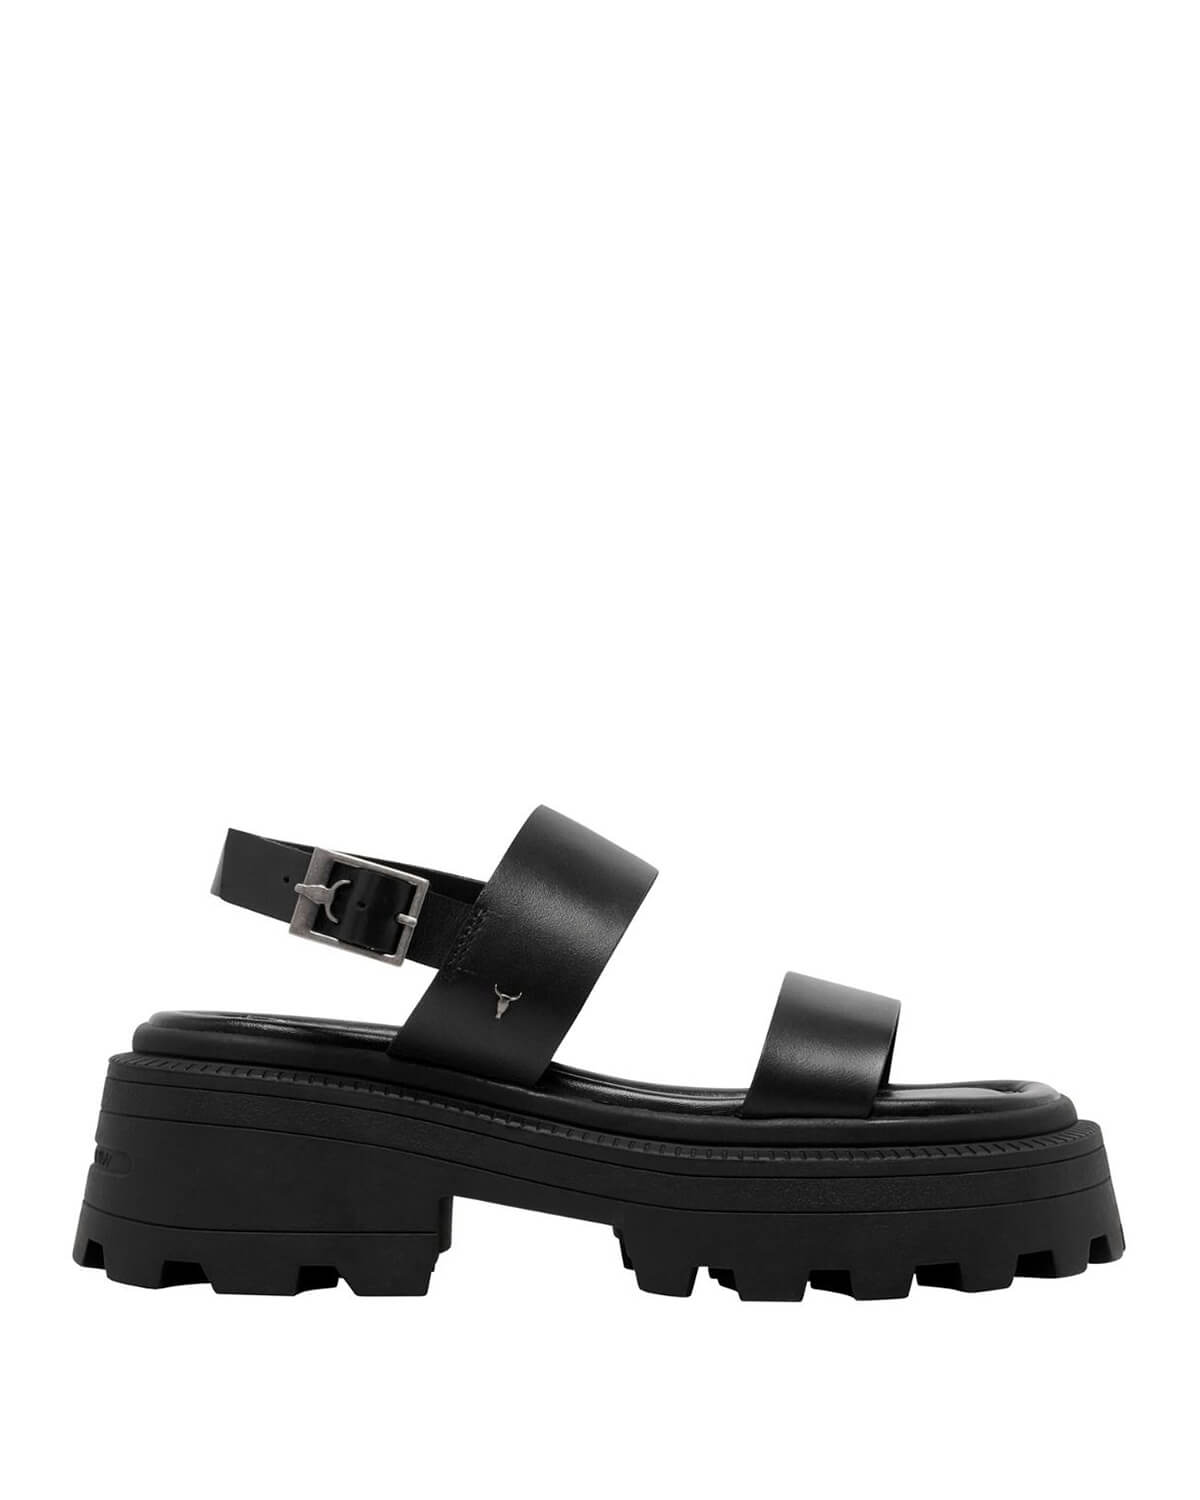 Black leather sandal - Anna shoes & more